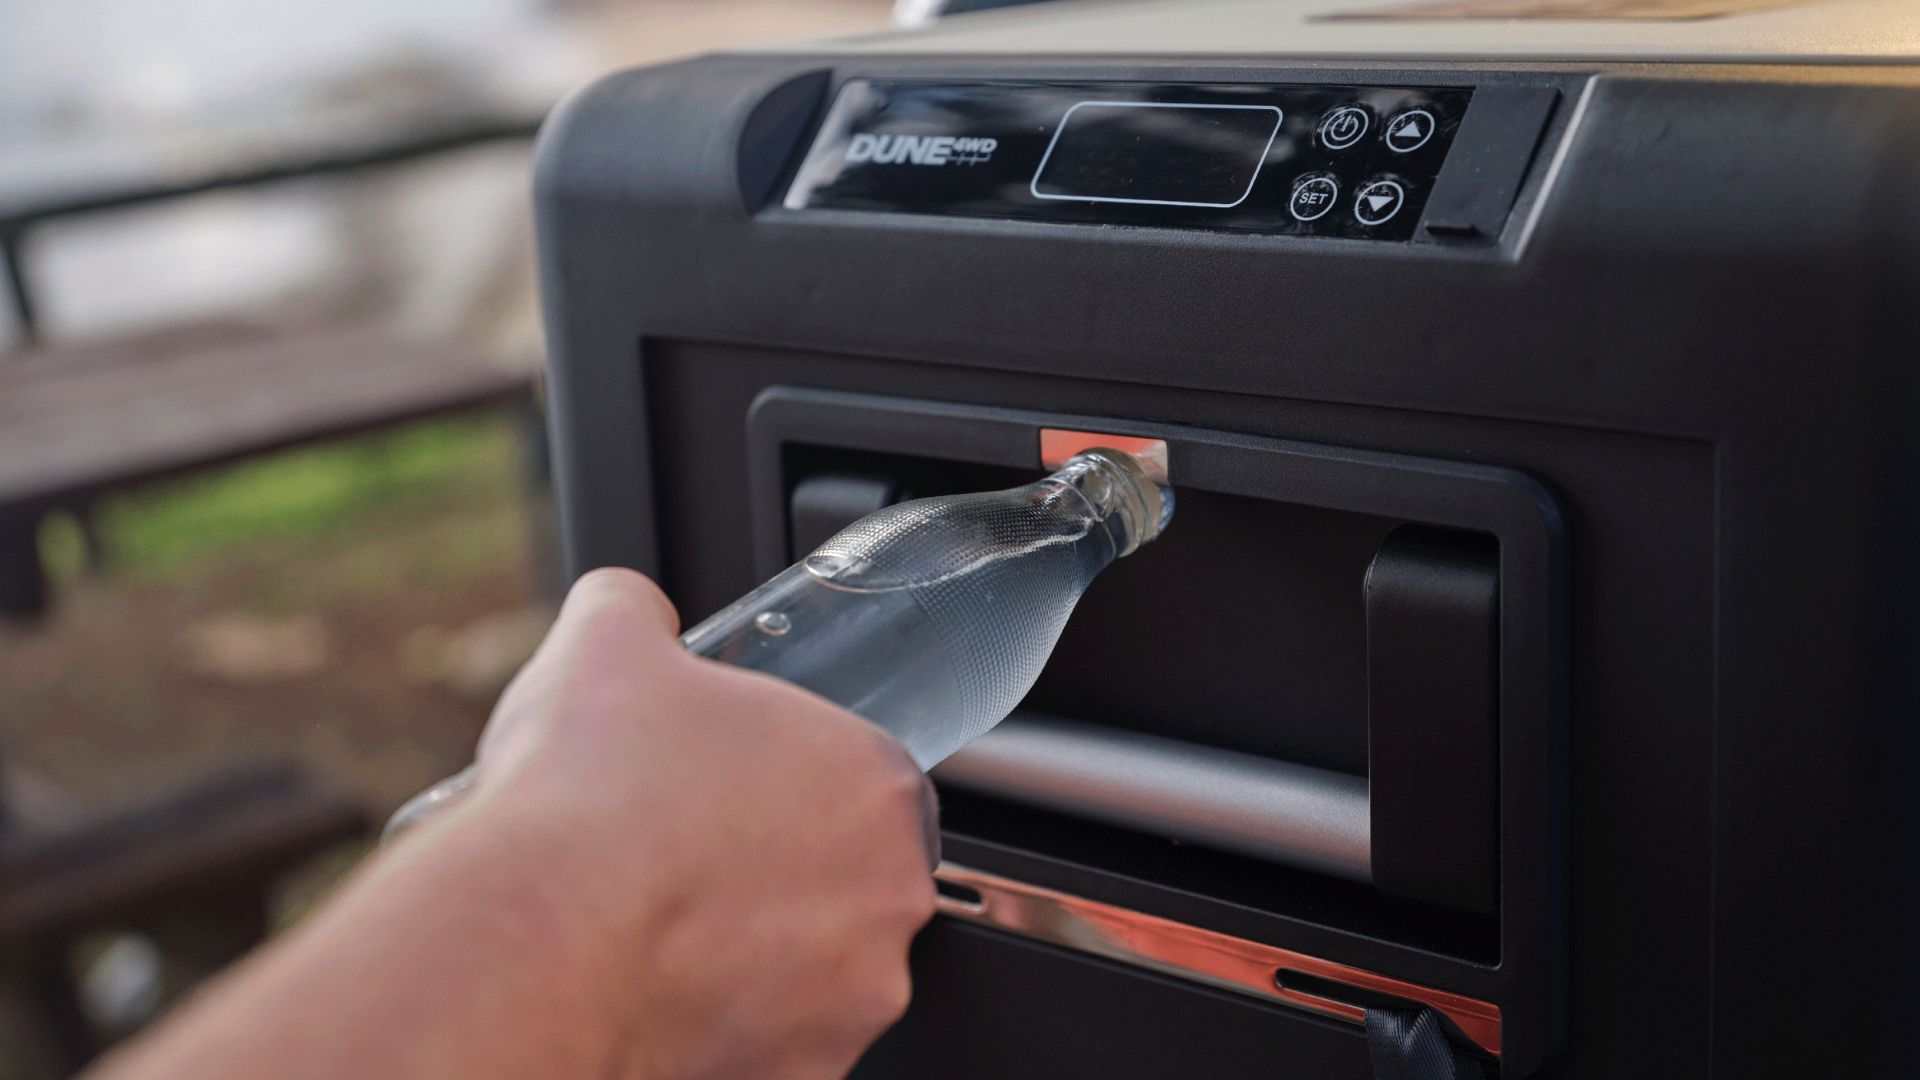 Dune 4WD Fridge/Freezers all come with built-in bottle openers and tie-down plates